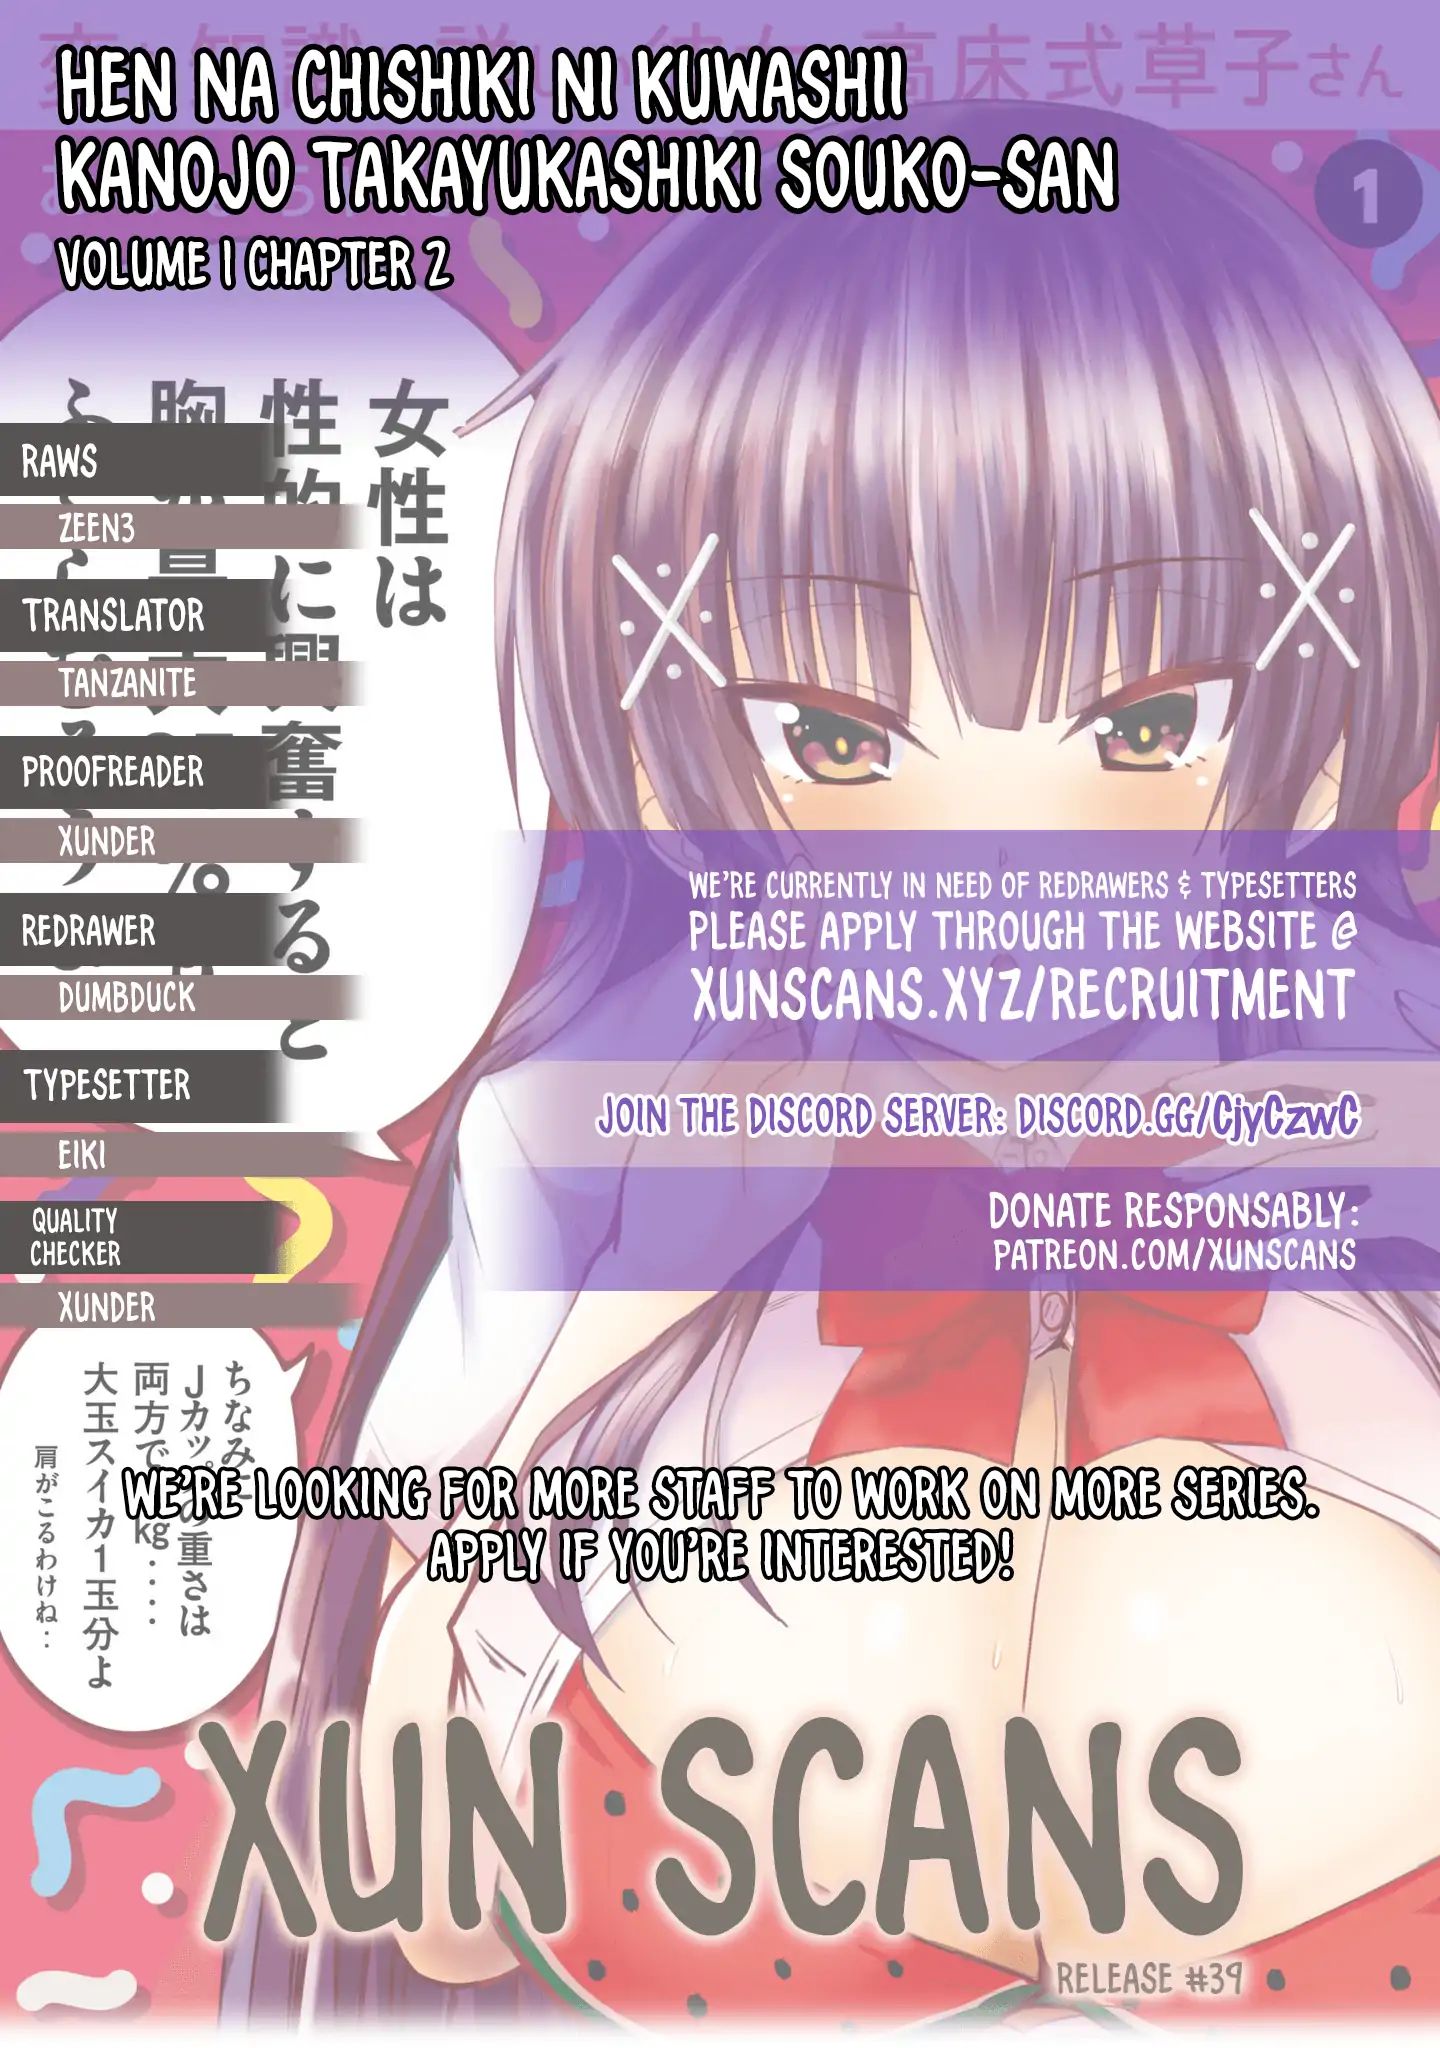 A Girl Who Is Very Well-Informed About Weird Knowledge, Takayukashiki Souko-San Chapter 2 #1